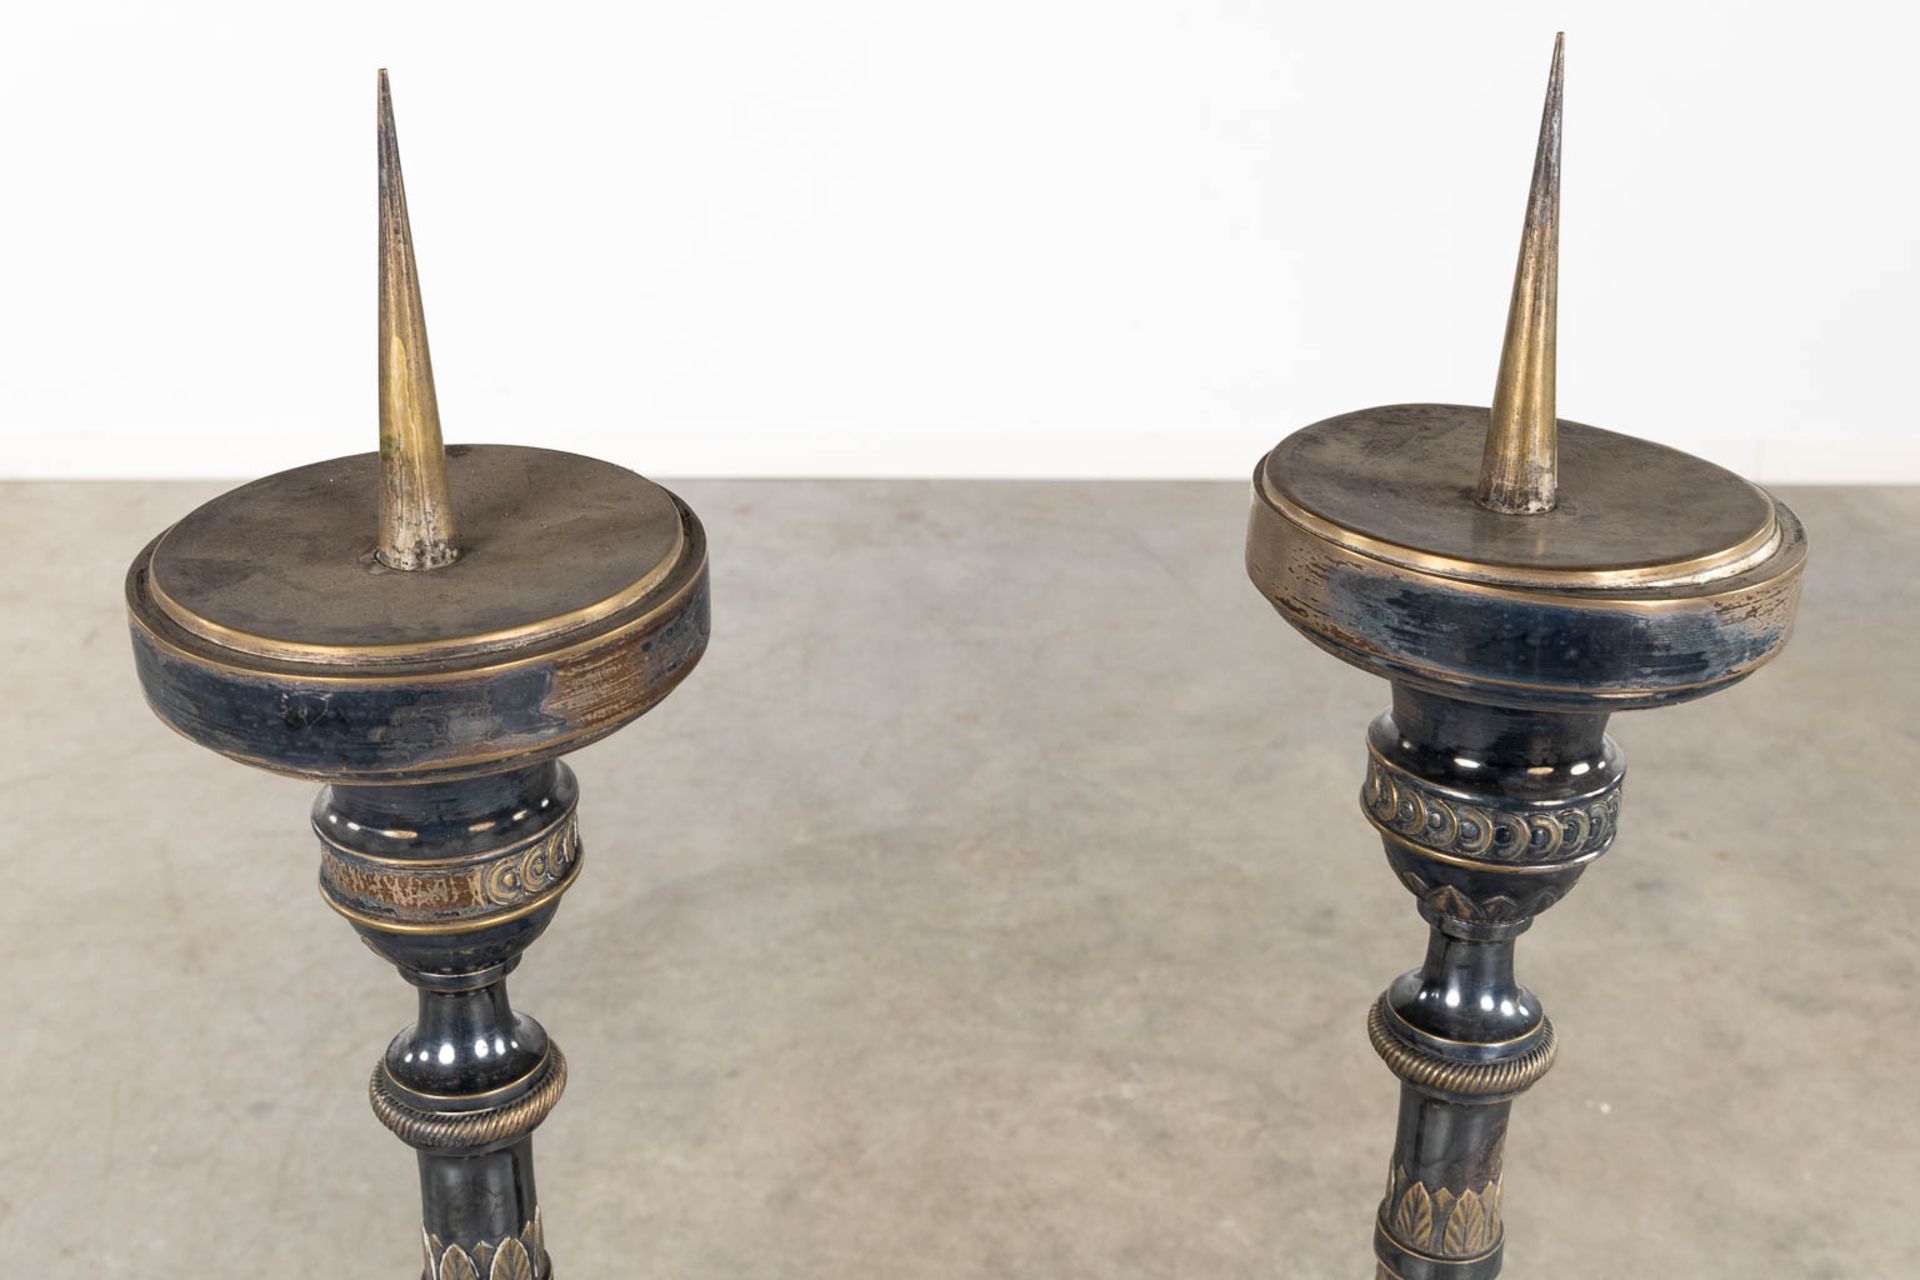 A pair of Church Candlesticks, silver- and gold-plated metal. 19th C. (H:120 cm) - Bild 9 aus 9